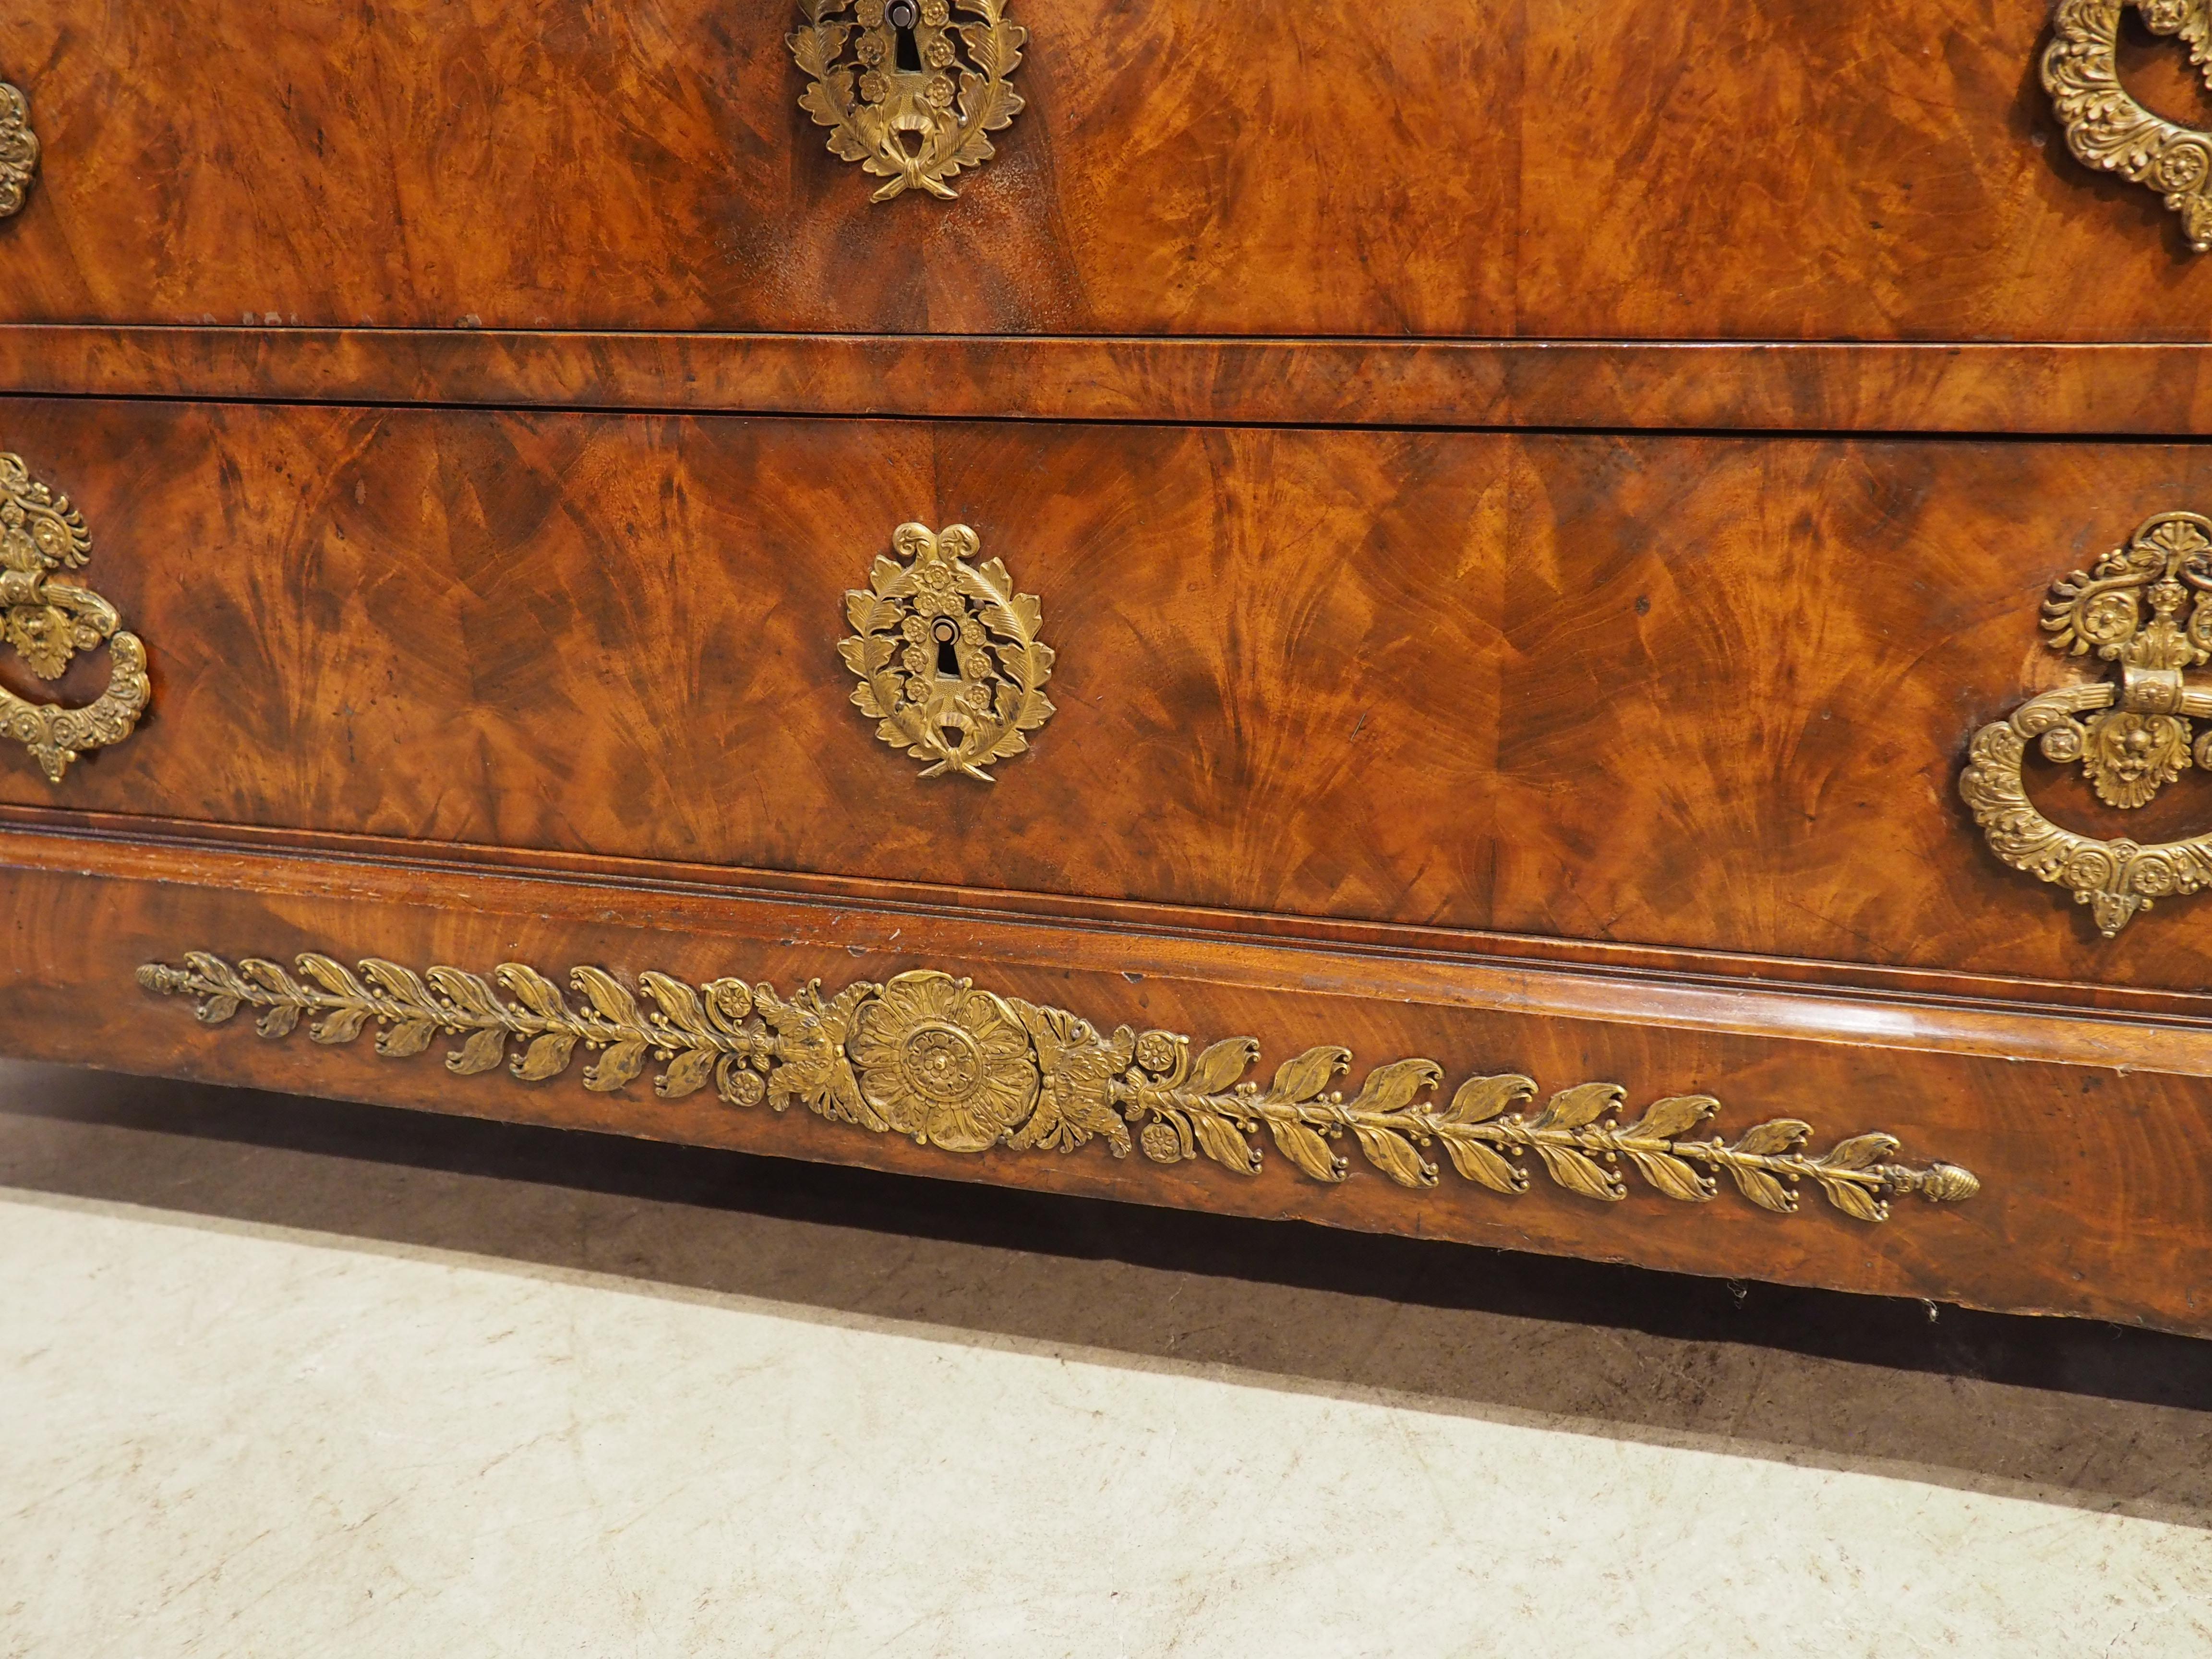 Hand-Carved Circa 1820 French Restauration Commode in Flame Mahogany, Gilt Bronze Hardware For Sale